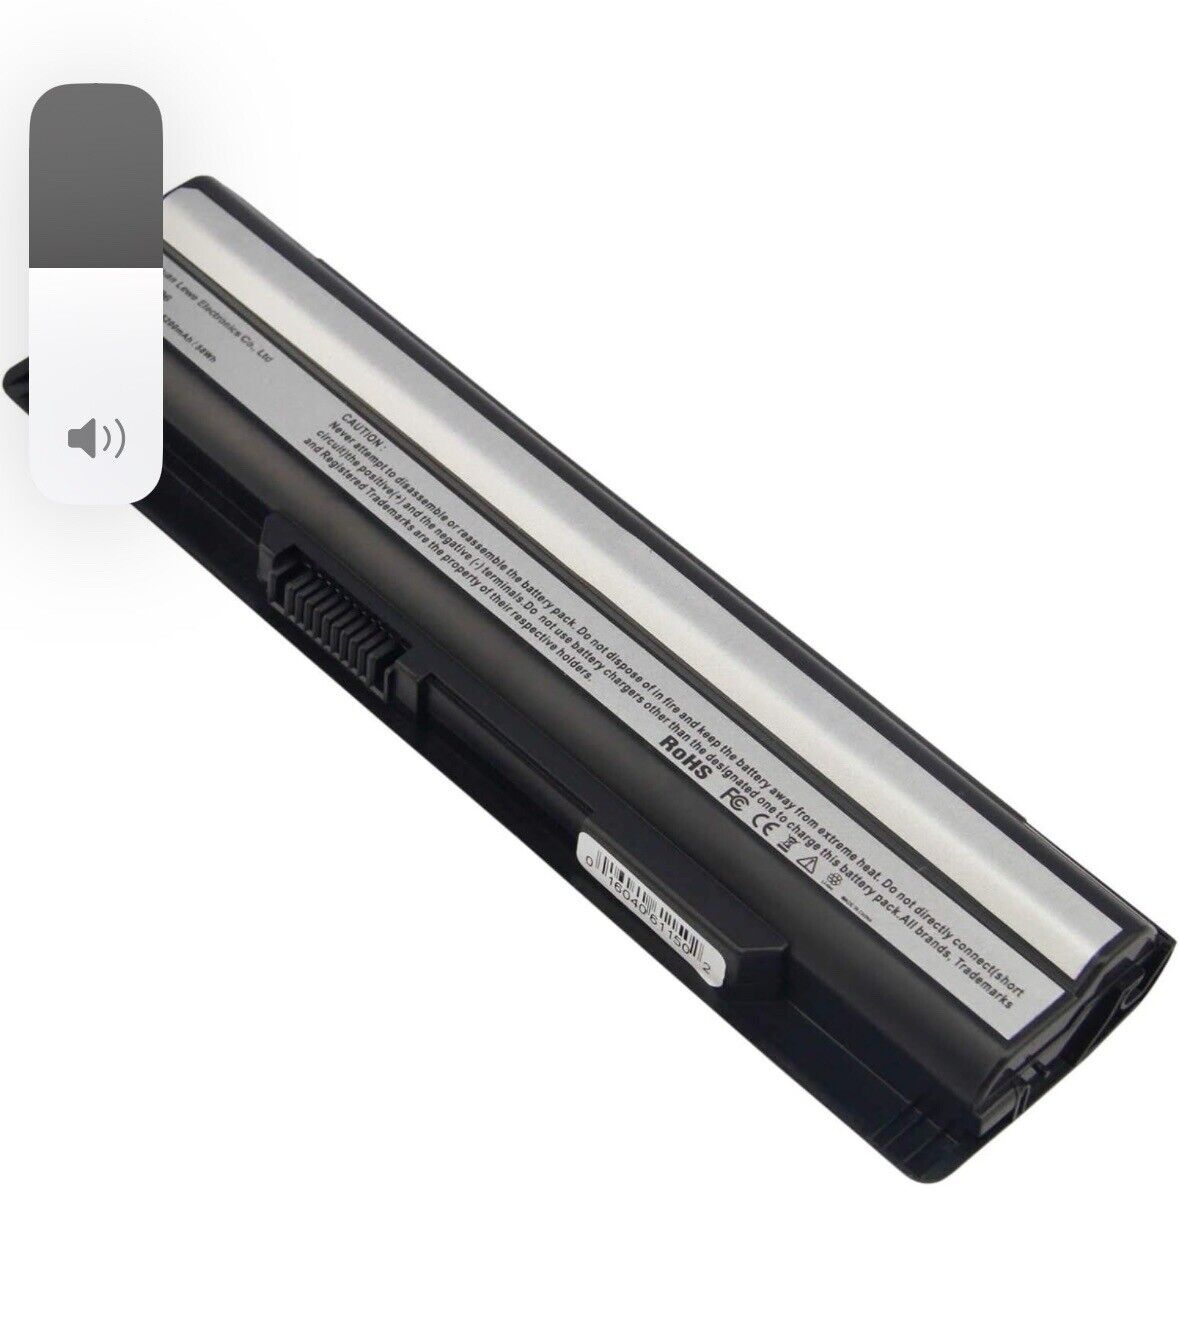 ARyee BTY-S14 5200mAh Laptop Battery Replacement for MSI GP60 GE60 CX61 GE620DX